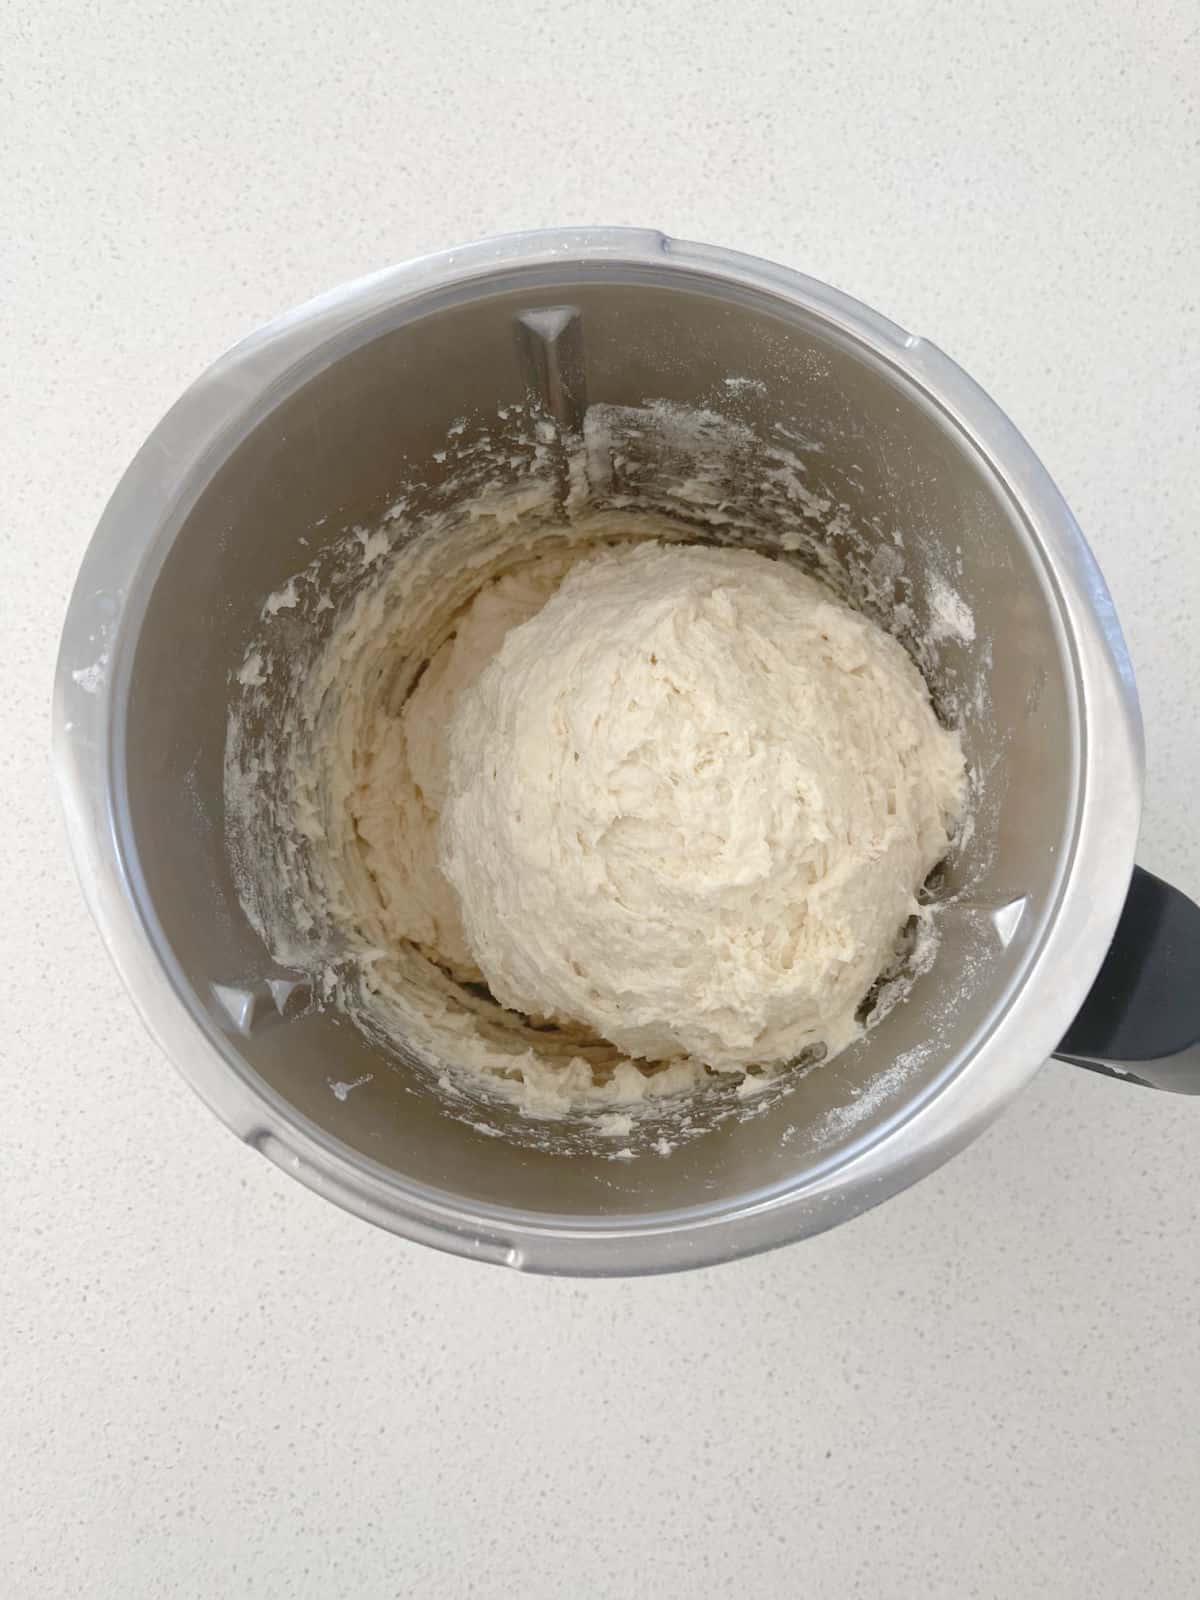 Scone dough in Thermomix bowl.